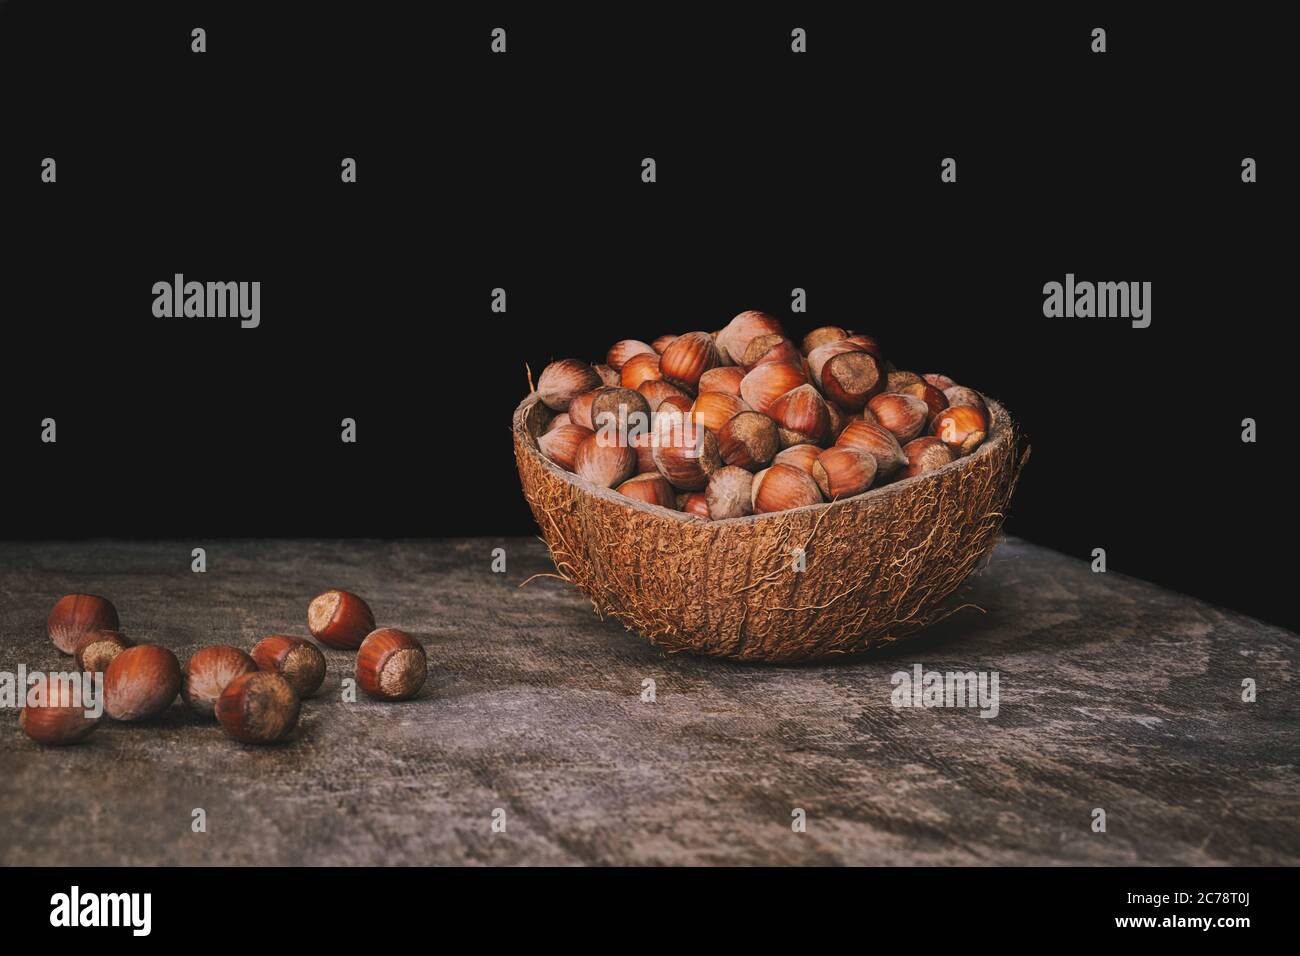 Pile of shelled hazelnuts in a coconut shell bowl on a wooden table on black background. Healthy eating. Stock Photo